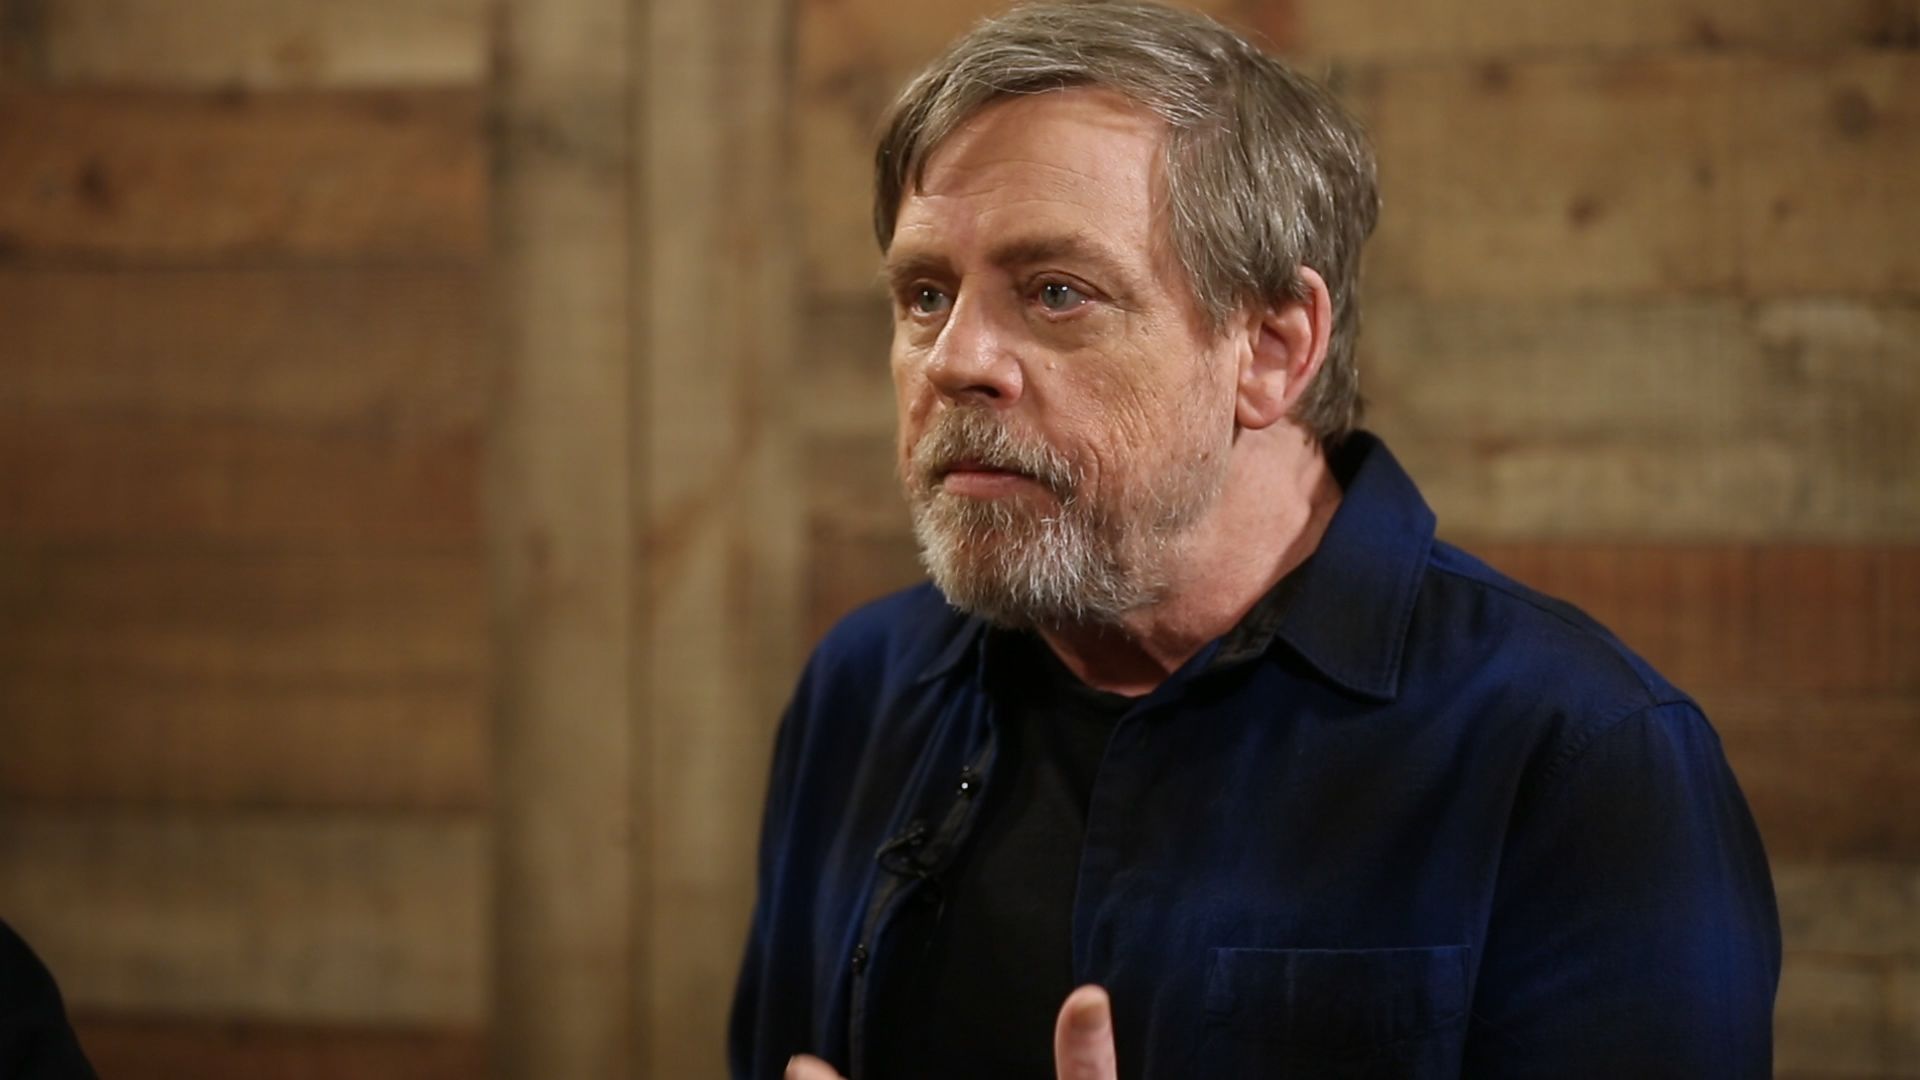 Mark Hamill calls for limits on de-aging, calls for age-appropriate Luke  Skywalker casting - Entertainment News